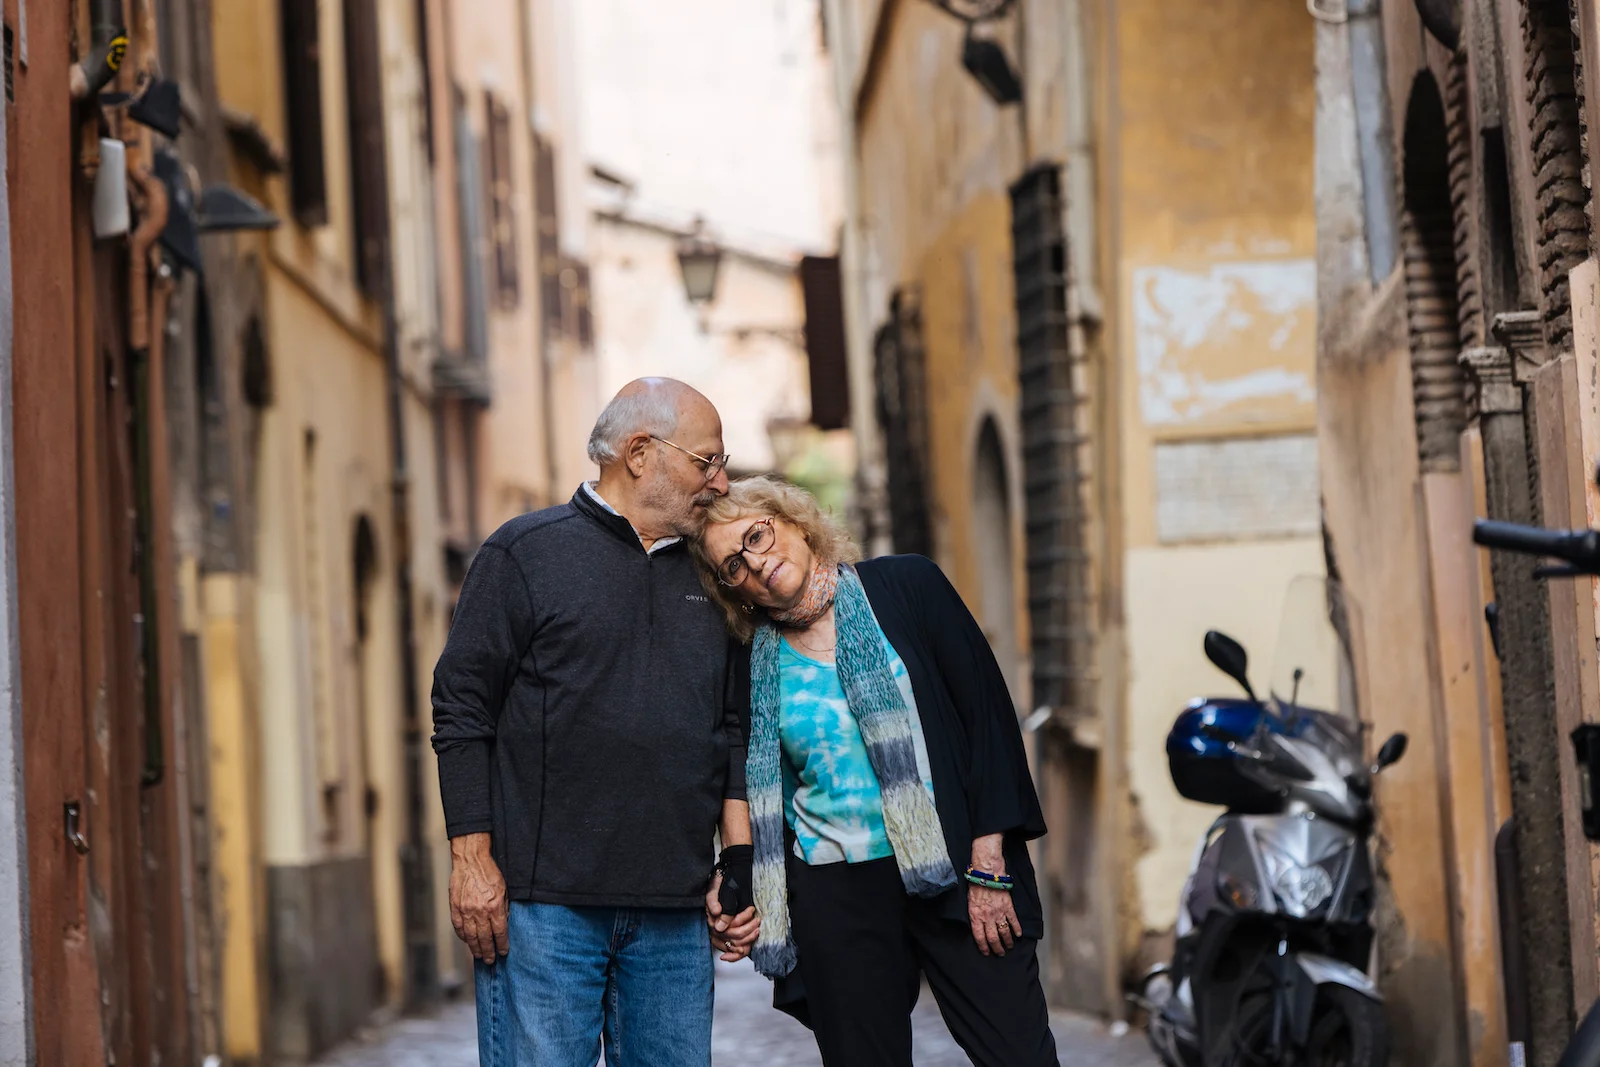 How the contest winners from TPG recreated romantic moments after 50 years of marriage